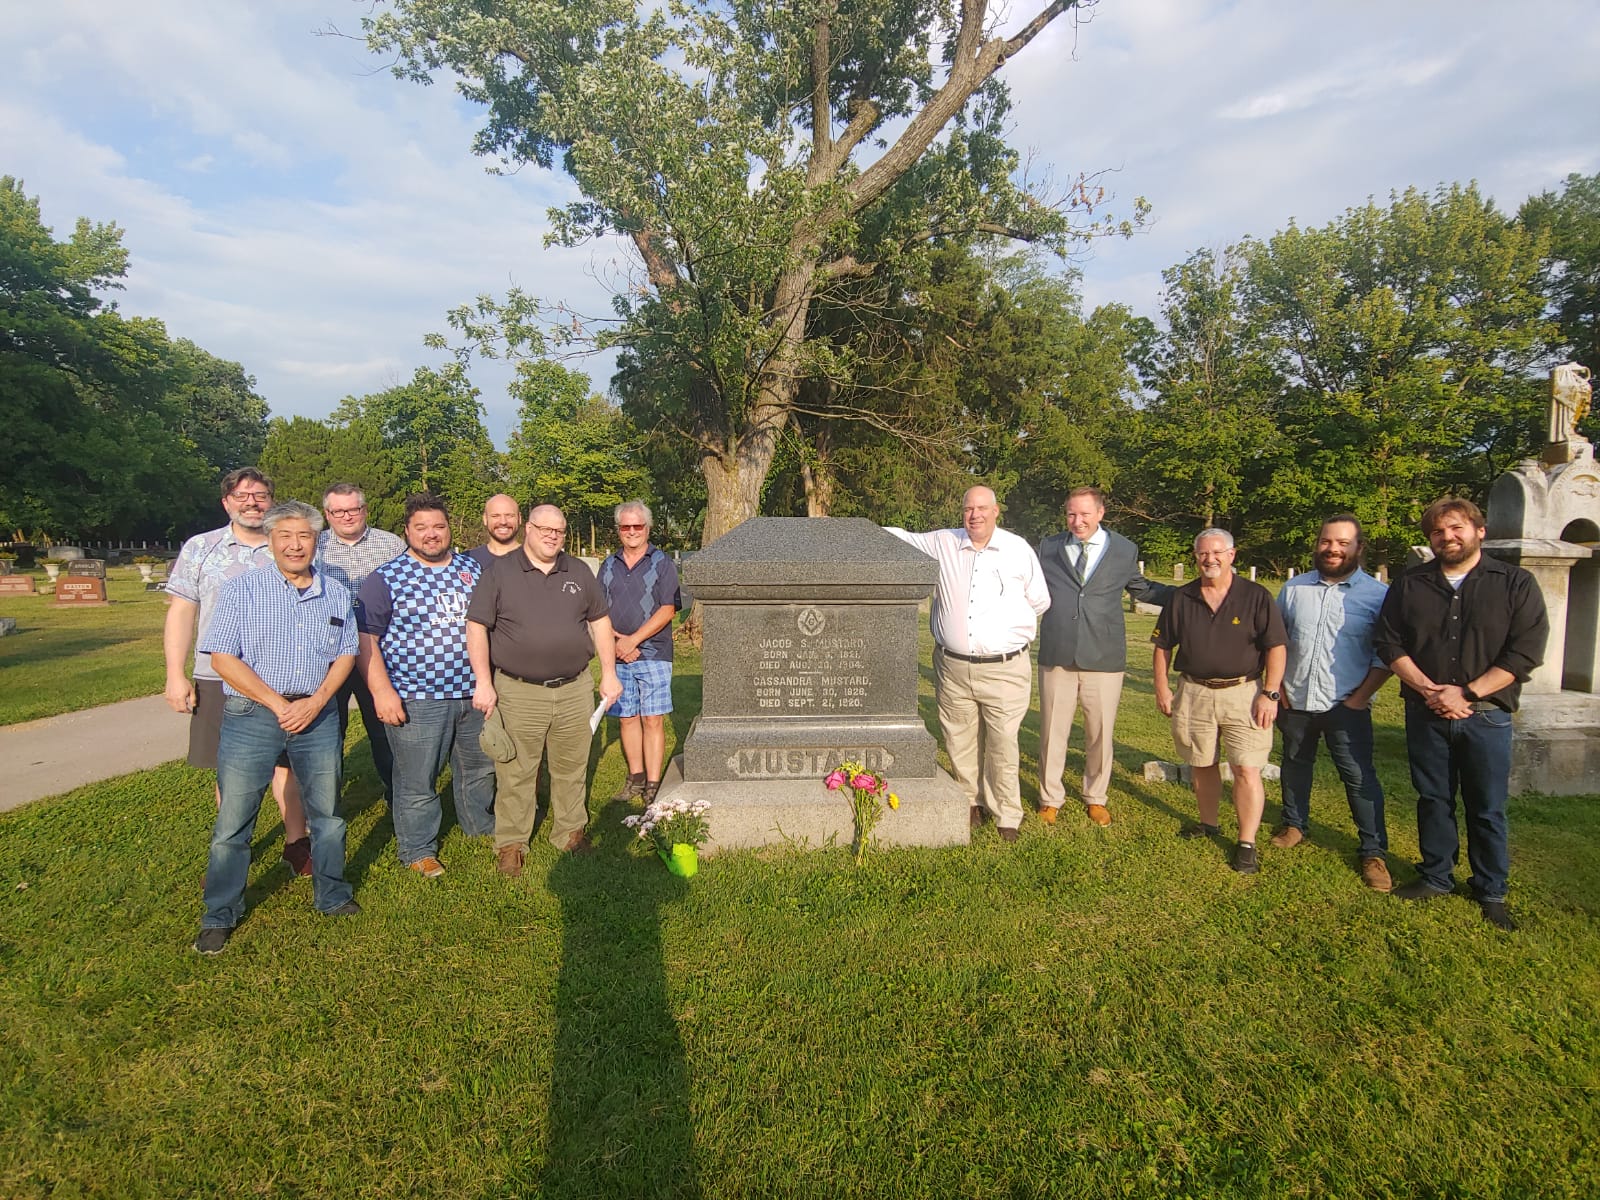 Brothers of Broad Ripple Lodge #643 visiting the gravesite of Bro Jacob Mustard and his wife Casandra.